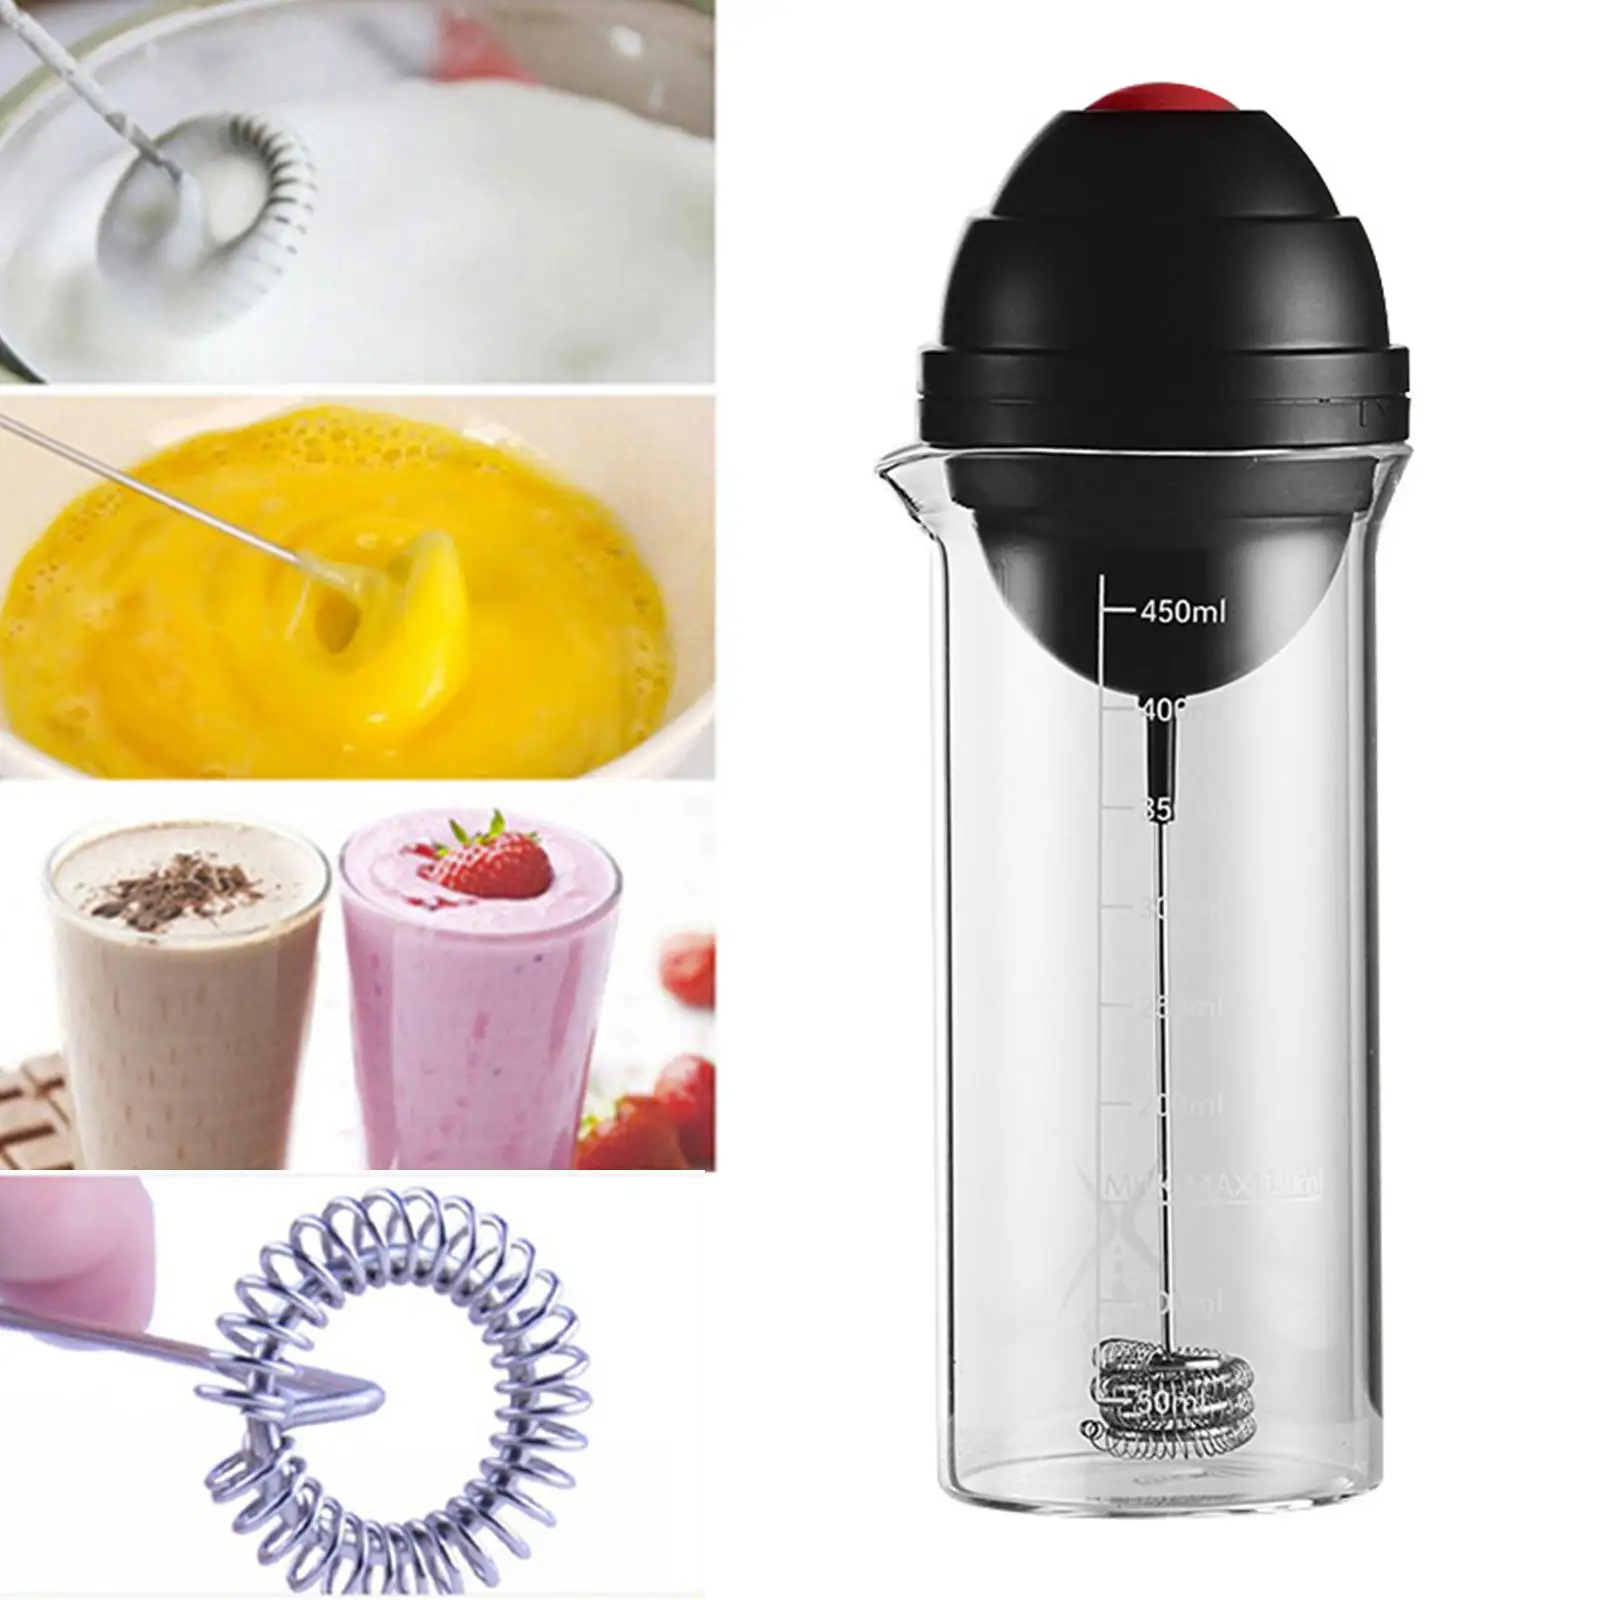 Cordless Electric Milk Forther Milk Foamer Coffee Frother 450ml for Coffee Latte Cappuccino Hot Chocolate Kitchen Gadgets